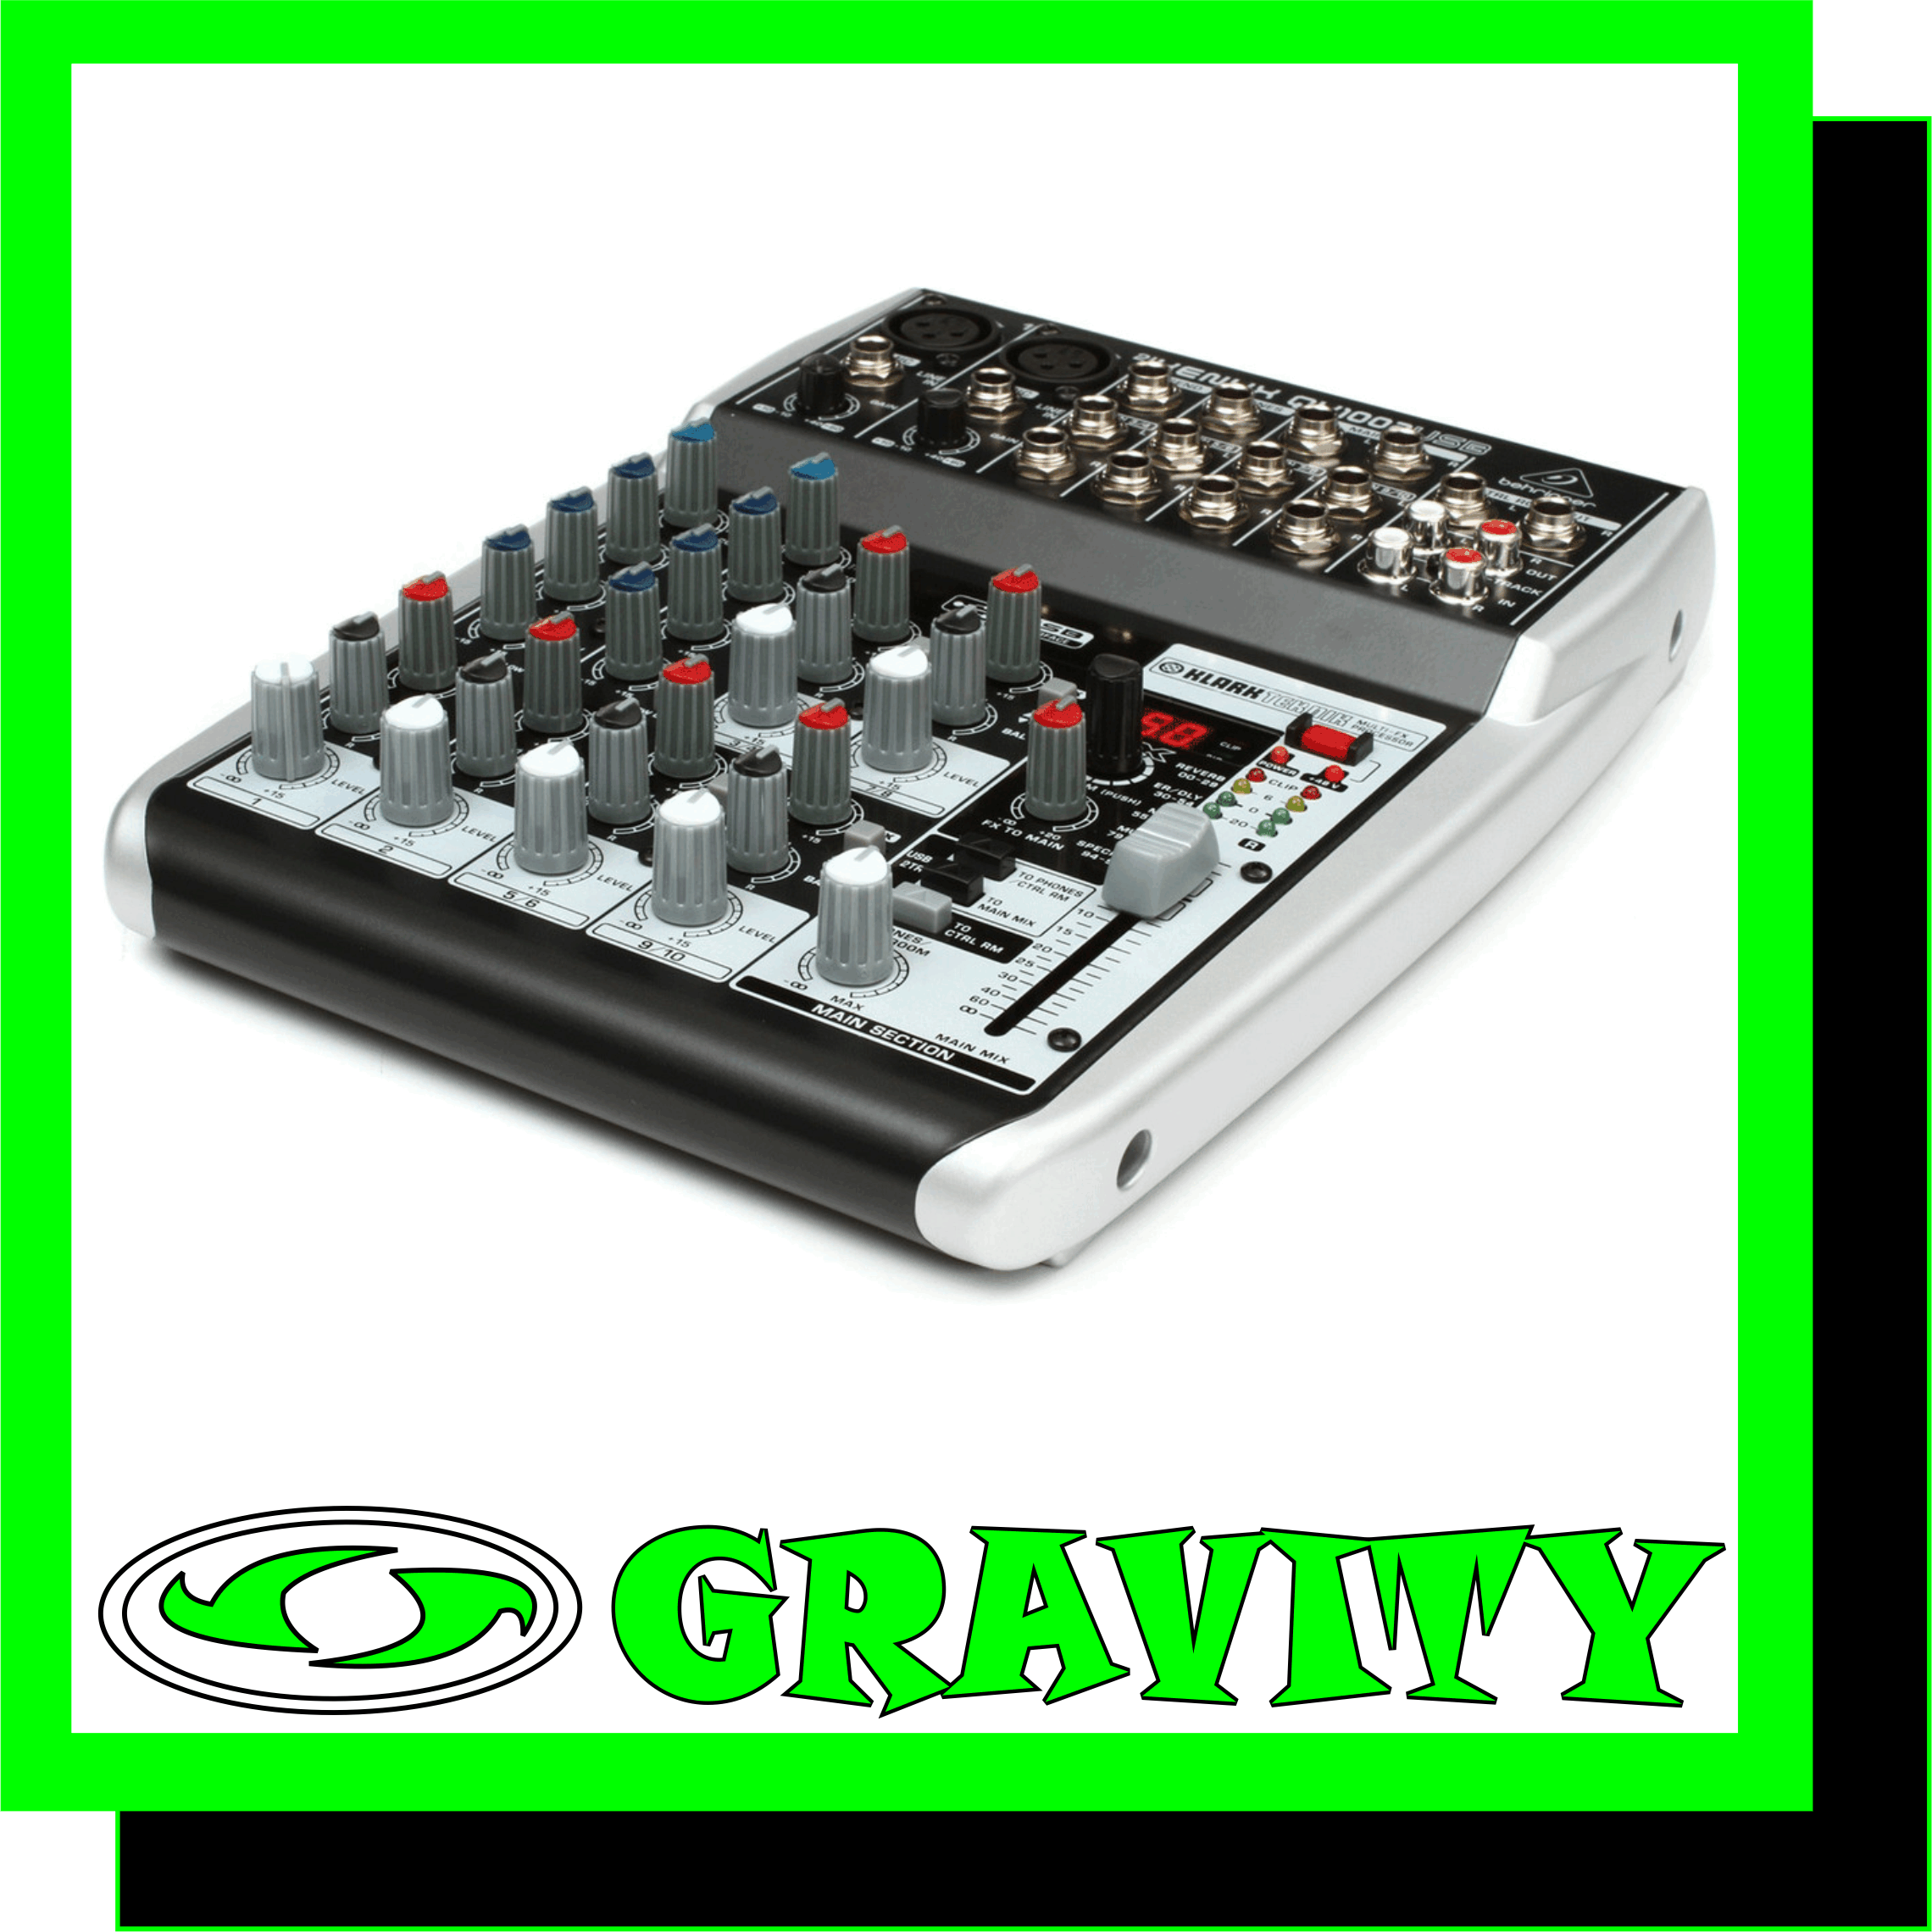 Behringer XENYX QX1002USB 10 input Mixer  Product Features: -Premium ultra-low noise, high headroom analog mixer -2 state-of-the-art XENYX Mic Preamps comparable to stand-alone boutique preamps -Studio-grade compressors with super-easy “one-knob” functionality and control -LED for professional vocal and instrumental sound -Ultra-high quality KLARK TEKNIK FX processor with 100 presets including reverb, -chorus, flanger, delay, pitch shifter and various multi-effects -Built-in stereo USB/Audio Interface to connect directly to your computer. Free -audio recording, editing and podcasting software plus 150 instrument/effect -plug-ins downloadable at behringer.com -Neo-classic “British” 3-band EQs for warm and musical sound -FX send control per channel for internal FX processor and/or as external send -Main mix outputs plus separate control room, phones and 2-Track outputs -2-Track inputs assignable to main mix or control room/phones outputs -High-quality components and exceptionally rugged construction ensure long life -Conceived and designed by BEHRINGER Germany  The compact QX1002USB mixer allows you to effortlessly achieve premium-quality sound, thanks to its 2 onboard studio-grade XENYX Mic Preamps and ultra-musical British channel EQs. And our easy-to-use one-knob compressors provide total dynamic control for the ultimate in punch and clarity, while respecting all the power and emotion you pack into every note. Add to this, the sweet forgiveness of our British-style EQs and a KLARK TEKNIK 24-Bit Multi-FX Processor with 100 presets including studio-class reverbs, delays, pitch shifter and various multi-effects and the QX1002USB becomes an incredibly versatile mixer for your live performances. But the XENYX QX1002USB isnt just designed to handle your live gigs; it also provides the state-of-the-art tools you need to make stunning, professional-quality recordings. Along with the built-in USB/audio interface, the QX1002USB comes with all the recording and editing software needed to turn your computer system into your own personal, high-performance home recording studio.